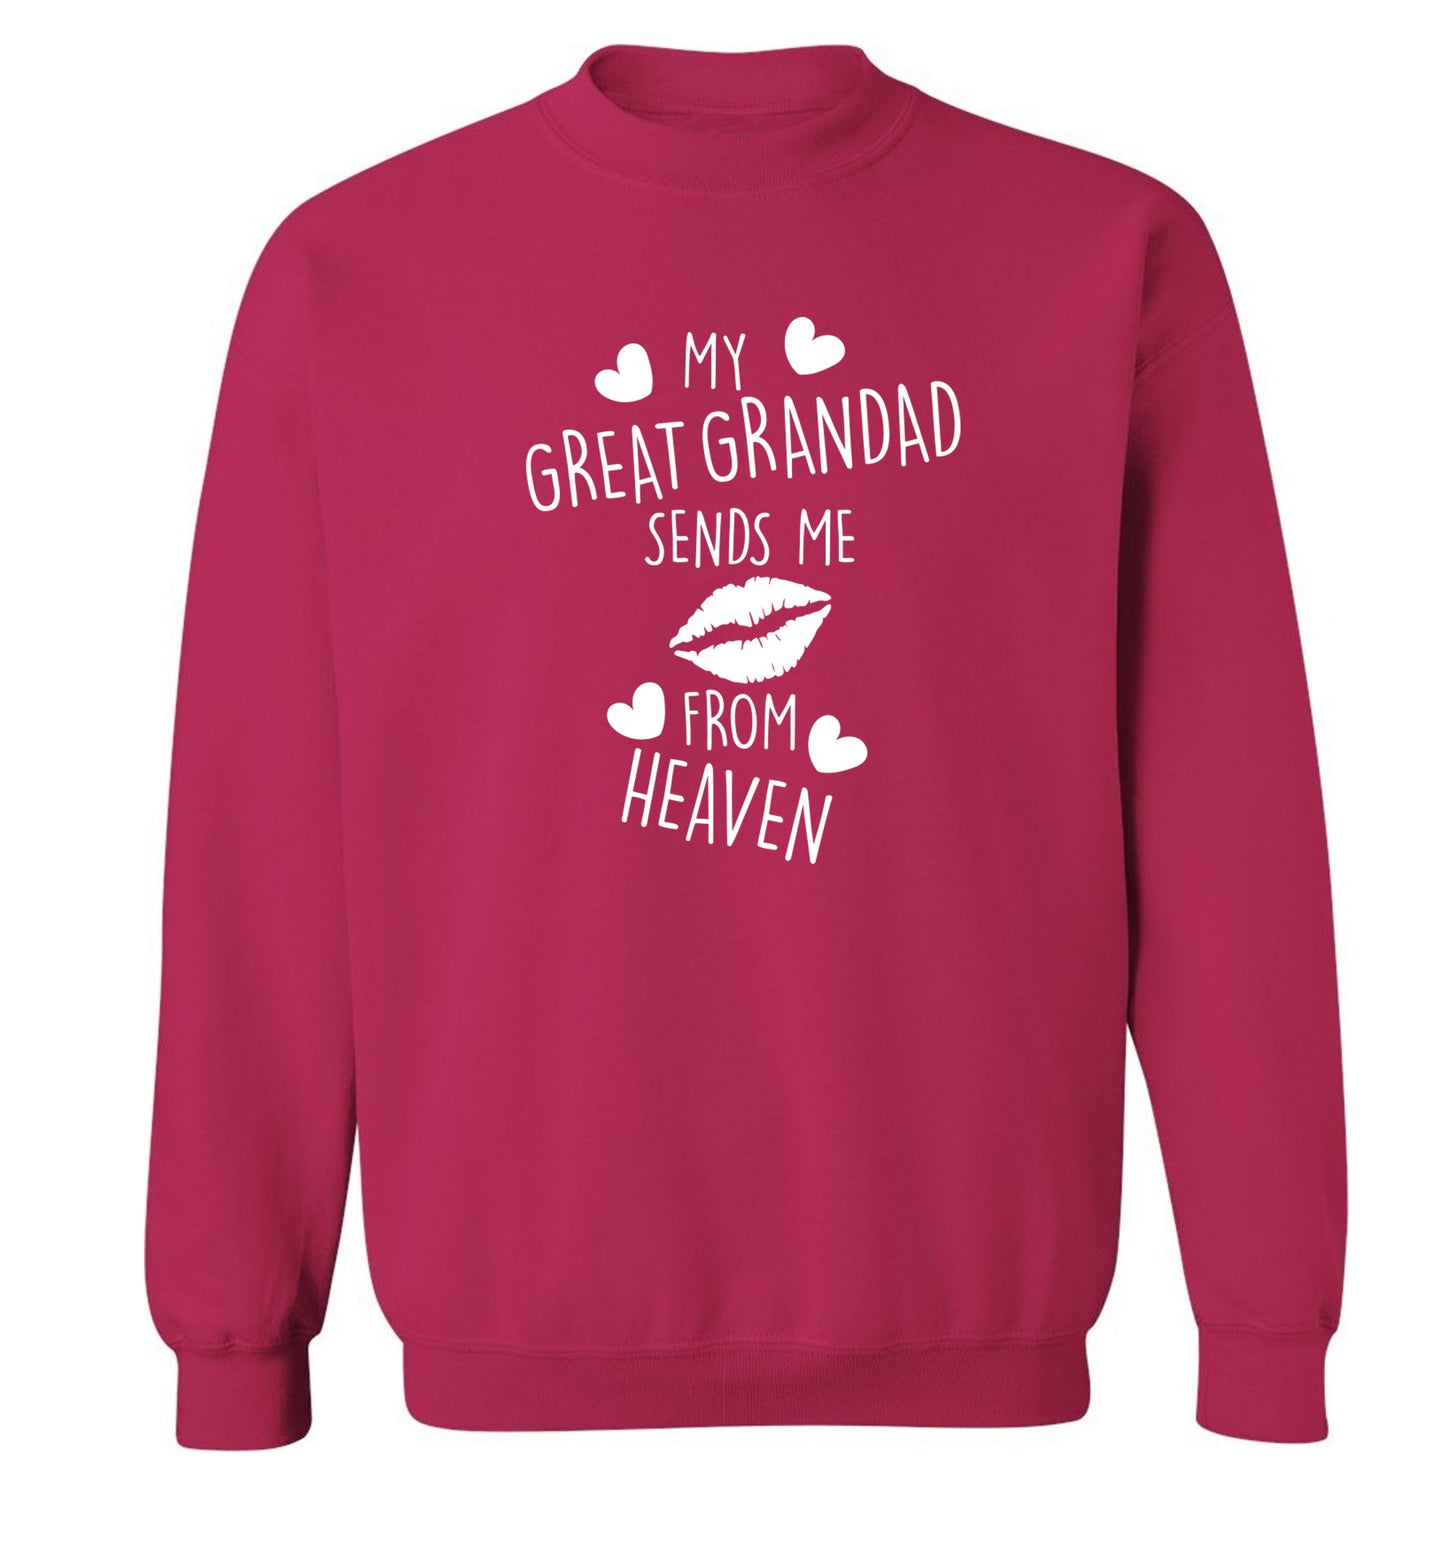 My great grandad sends me kisses from heaven Adult's unisex pink Sweater 2XL